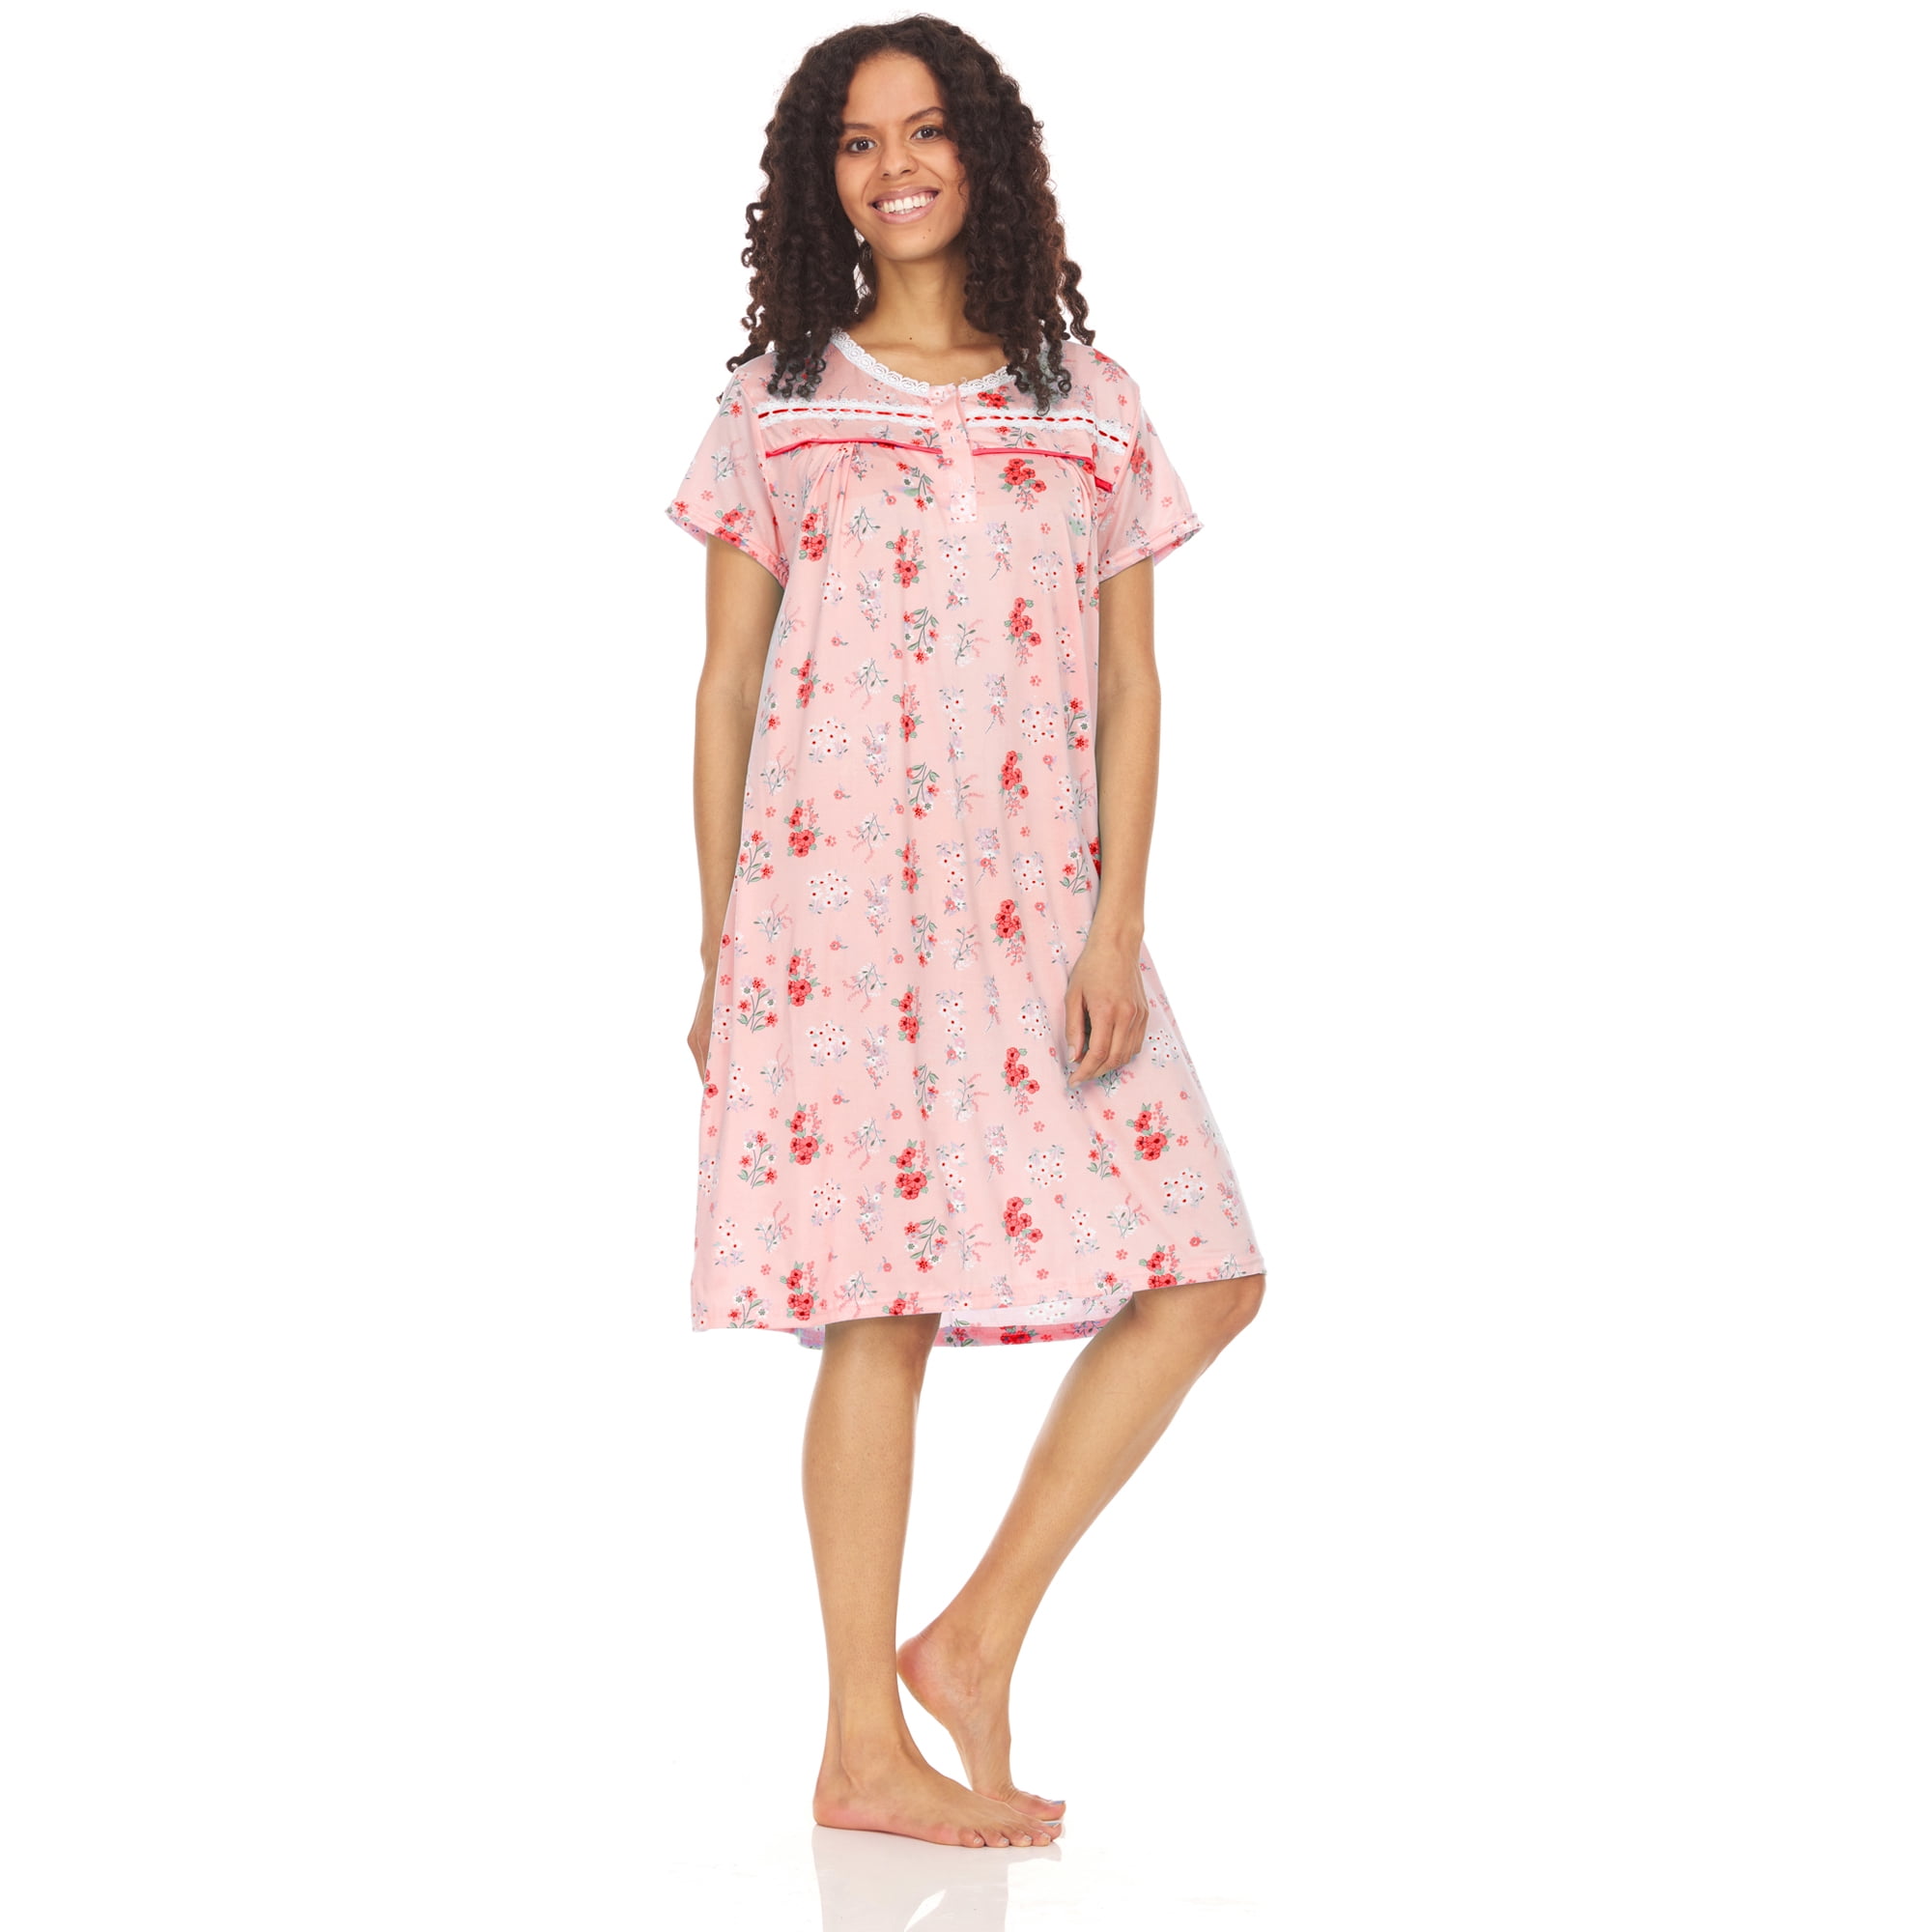 EZI Nightgowns for Women - Soft & Breathable Night Gowns for Adult - Medium to Plus Size Womens Sleep Shirts - Knee-Length - Walmart.com